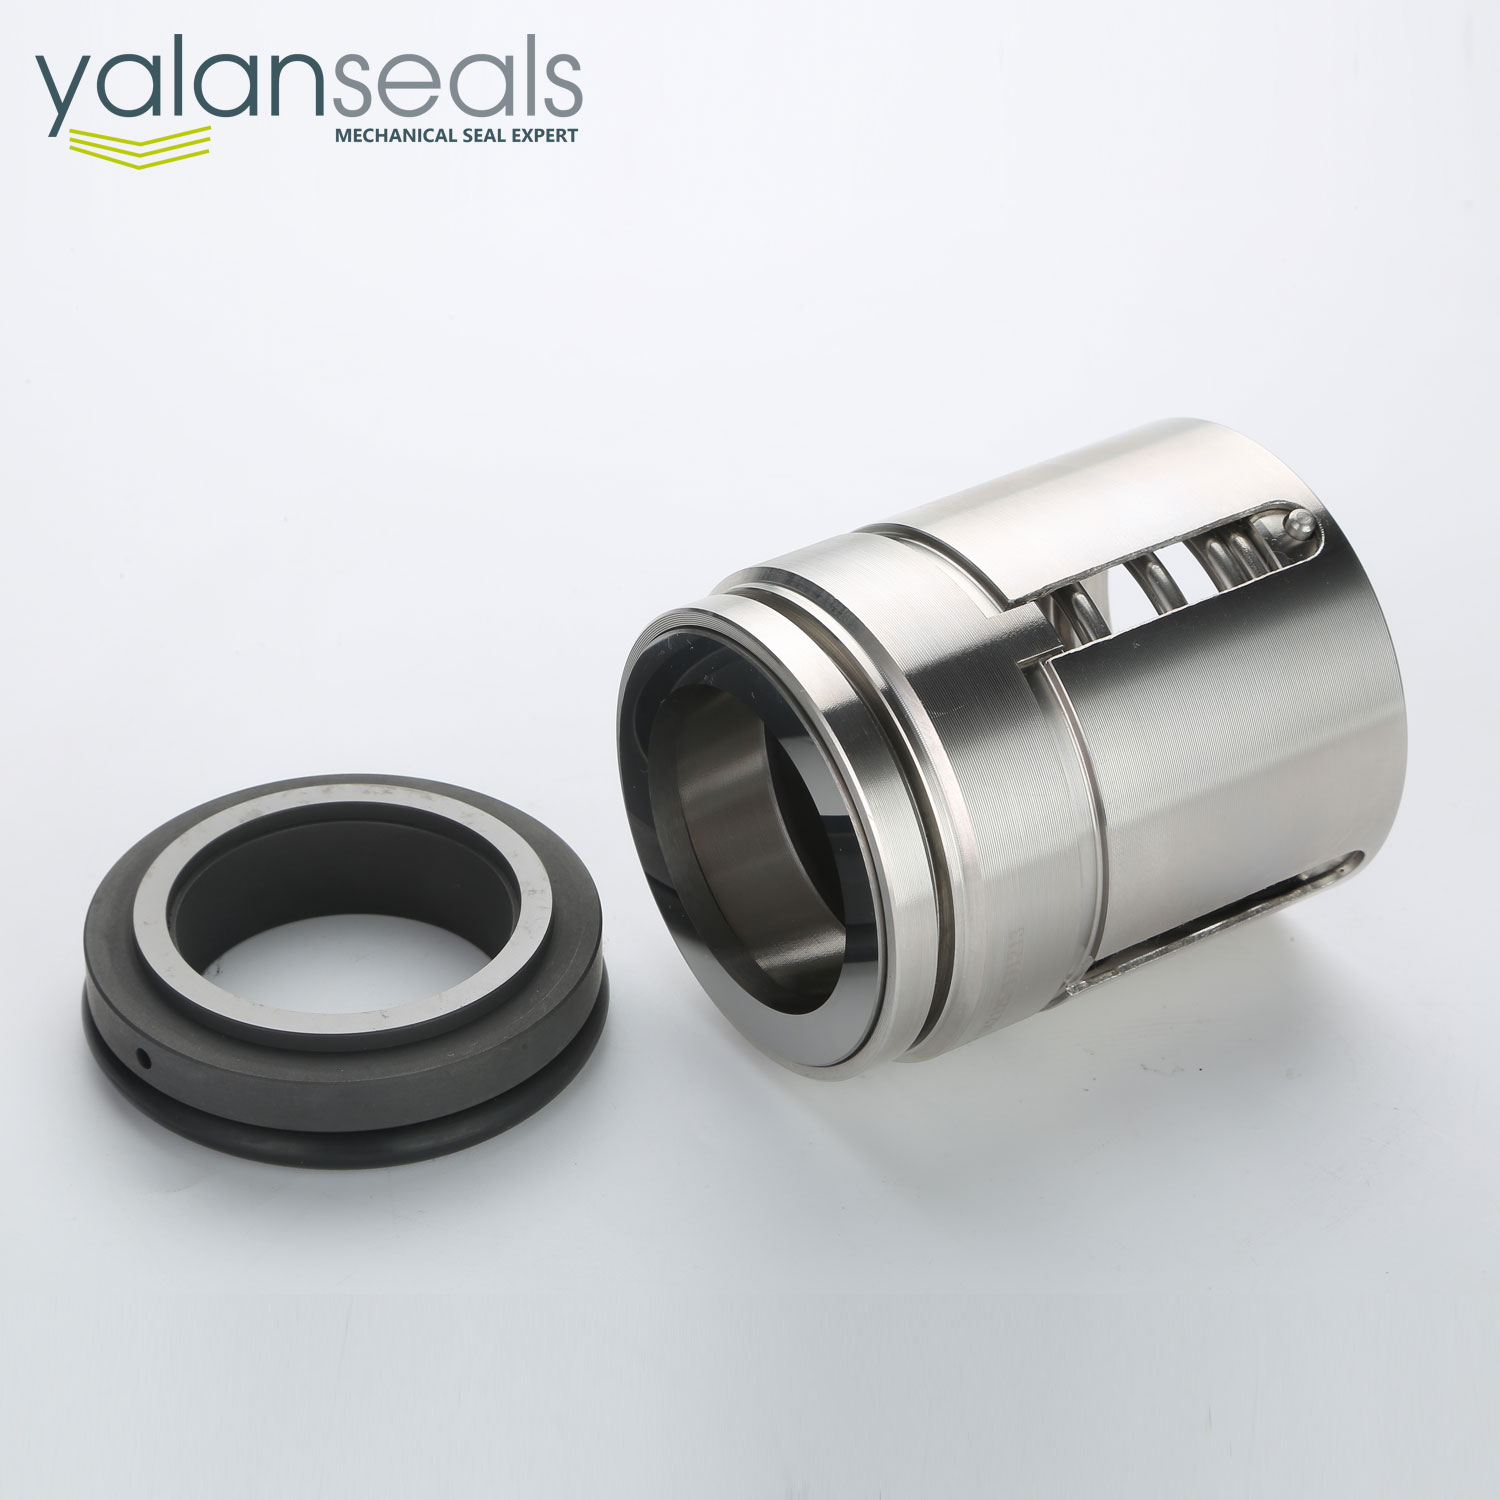 Type UK Single Spring Mechanical Seal for Oil Pumps and Chemical Process Pumps